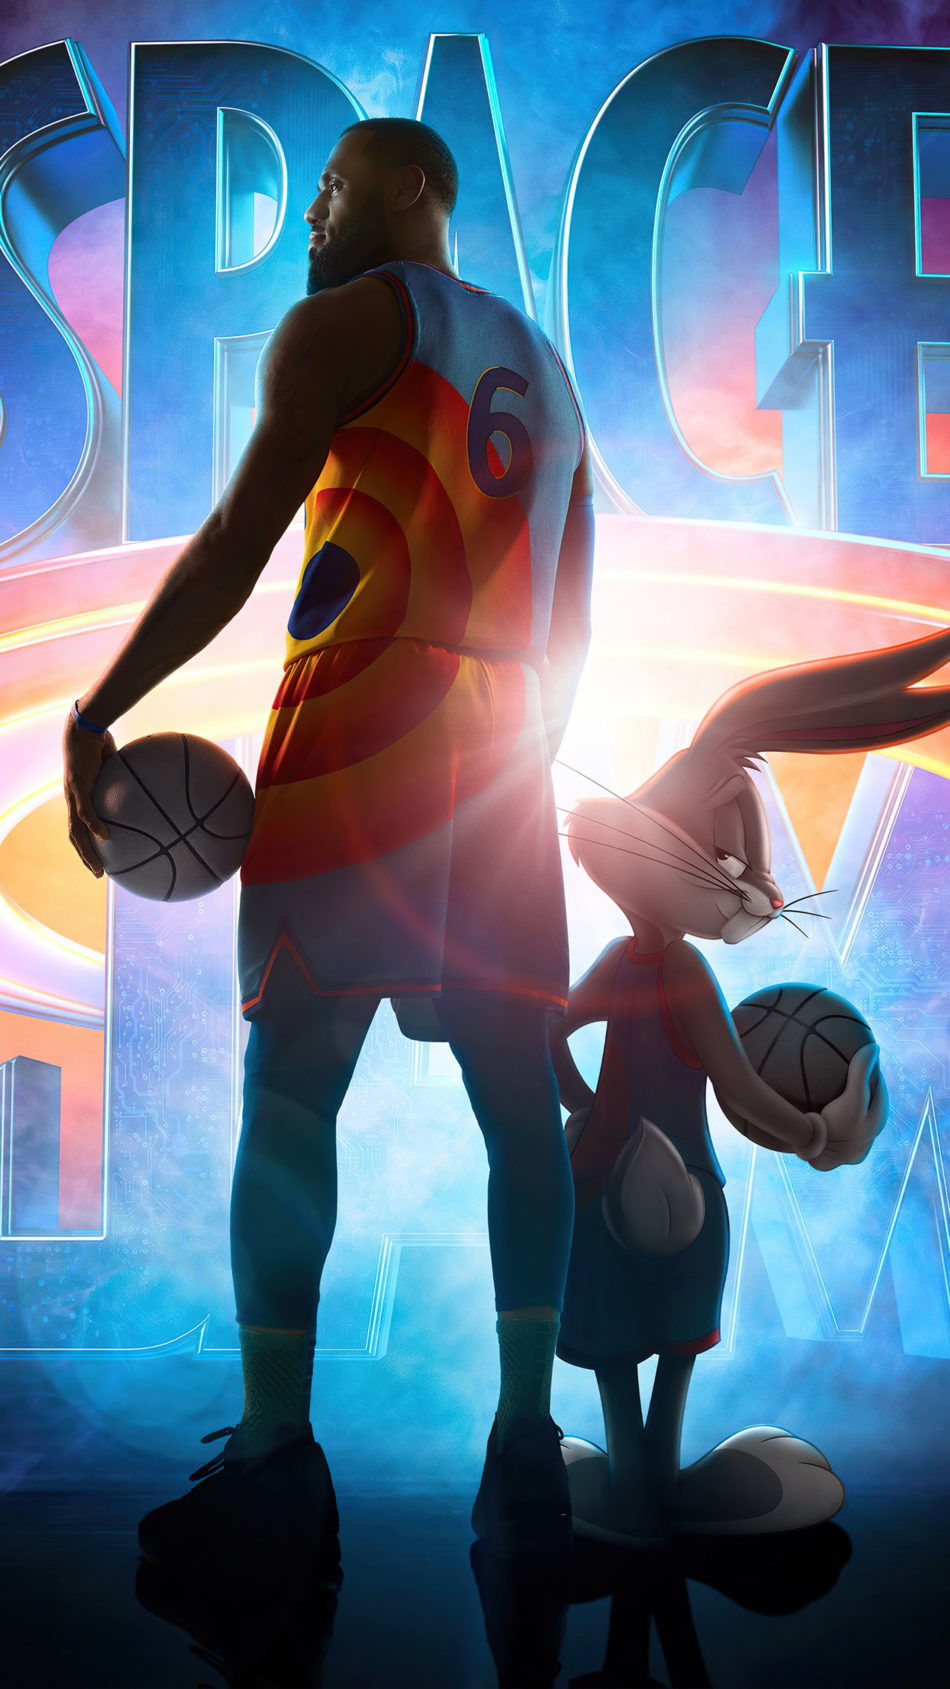 Space Jam A New Legacy Poster 4K Ultra HD Mobile Wallpaper